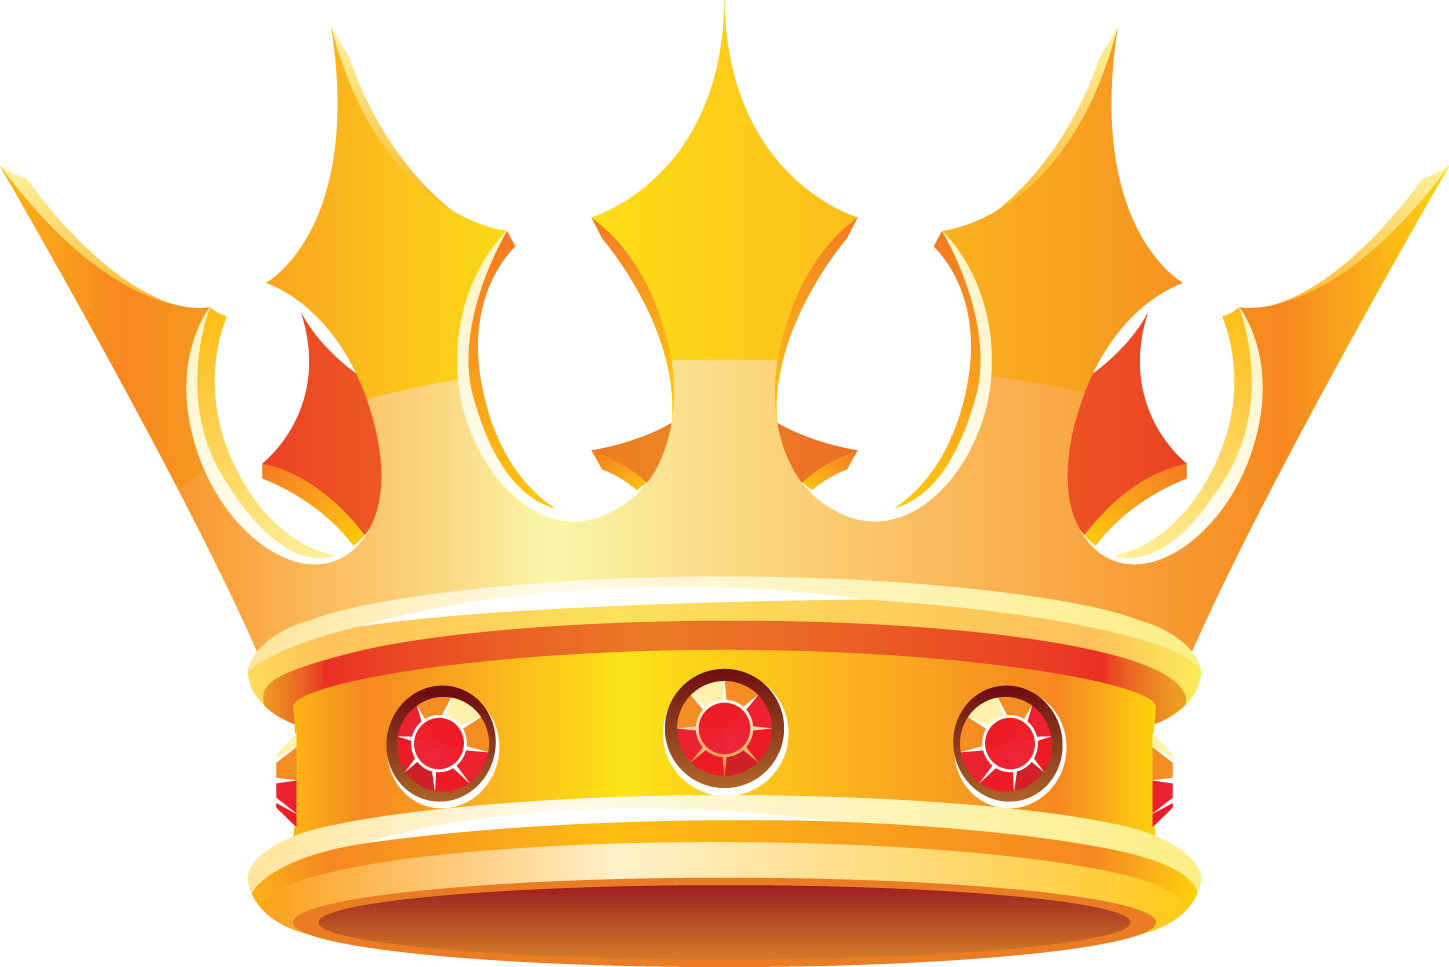 King Crowns Clipart King Crown Clipart